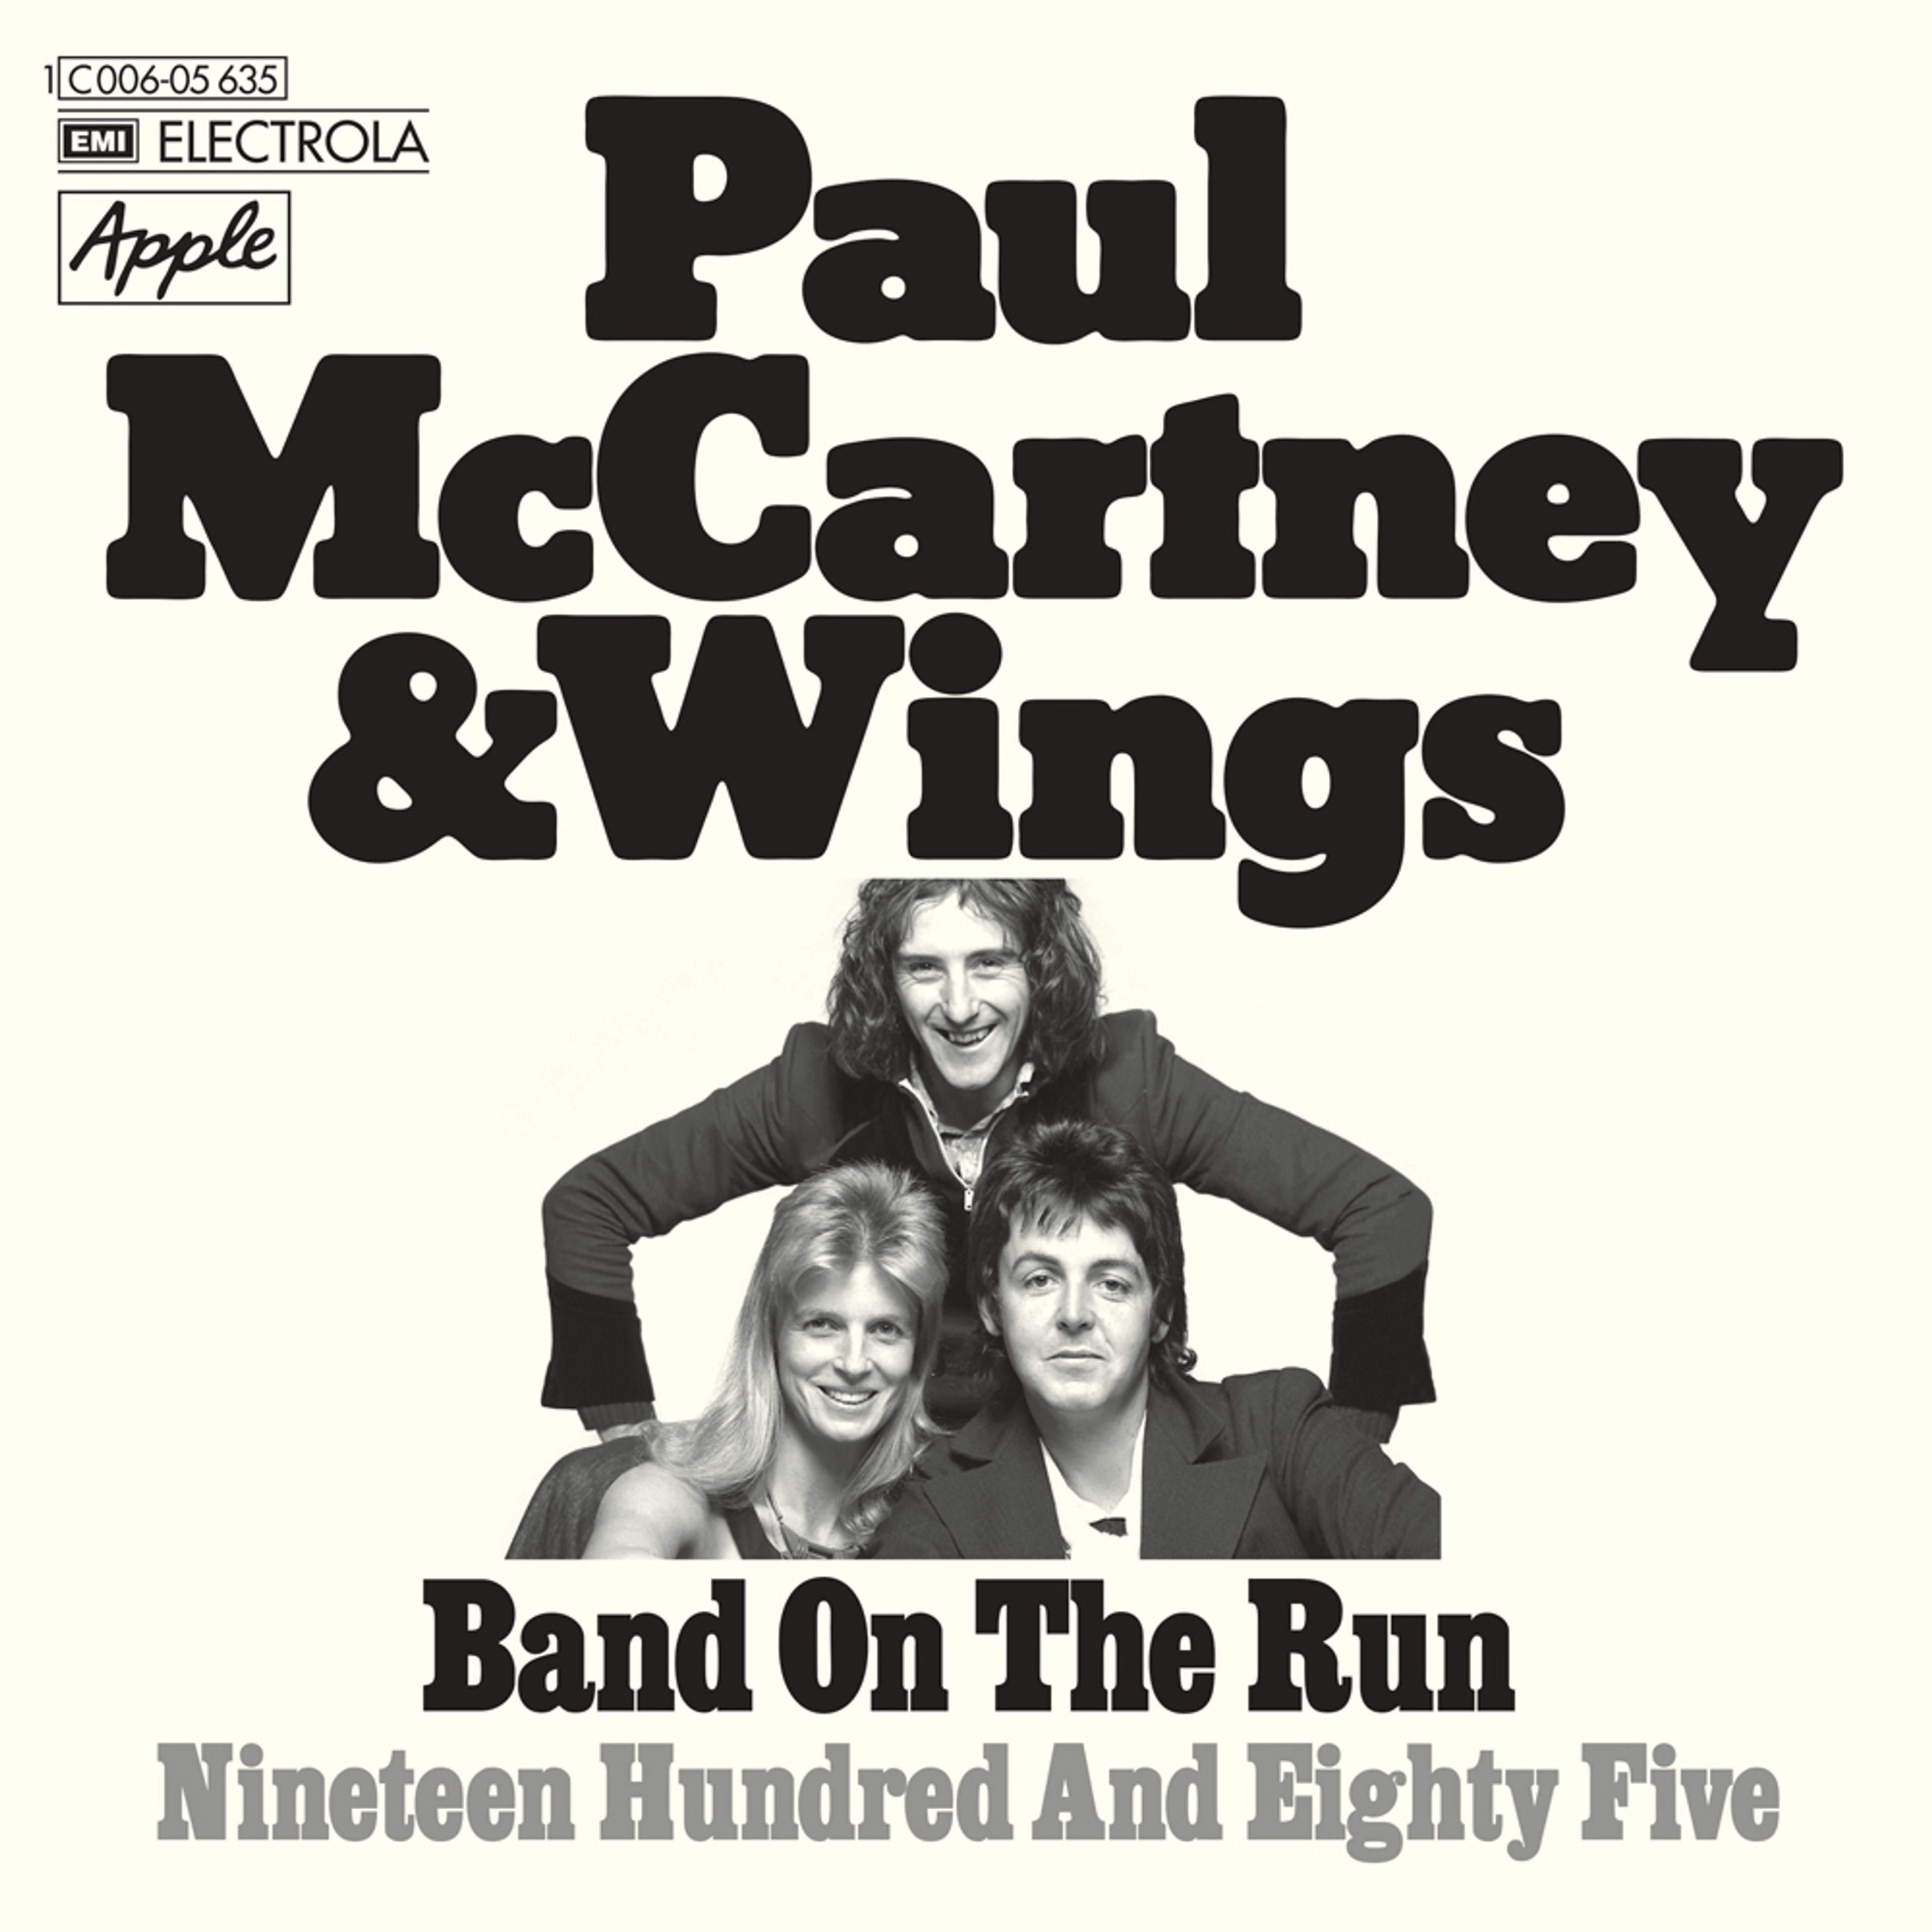 “Band on the Run” Single artwork as featured in 'The 7" Singles Box'